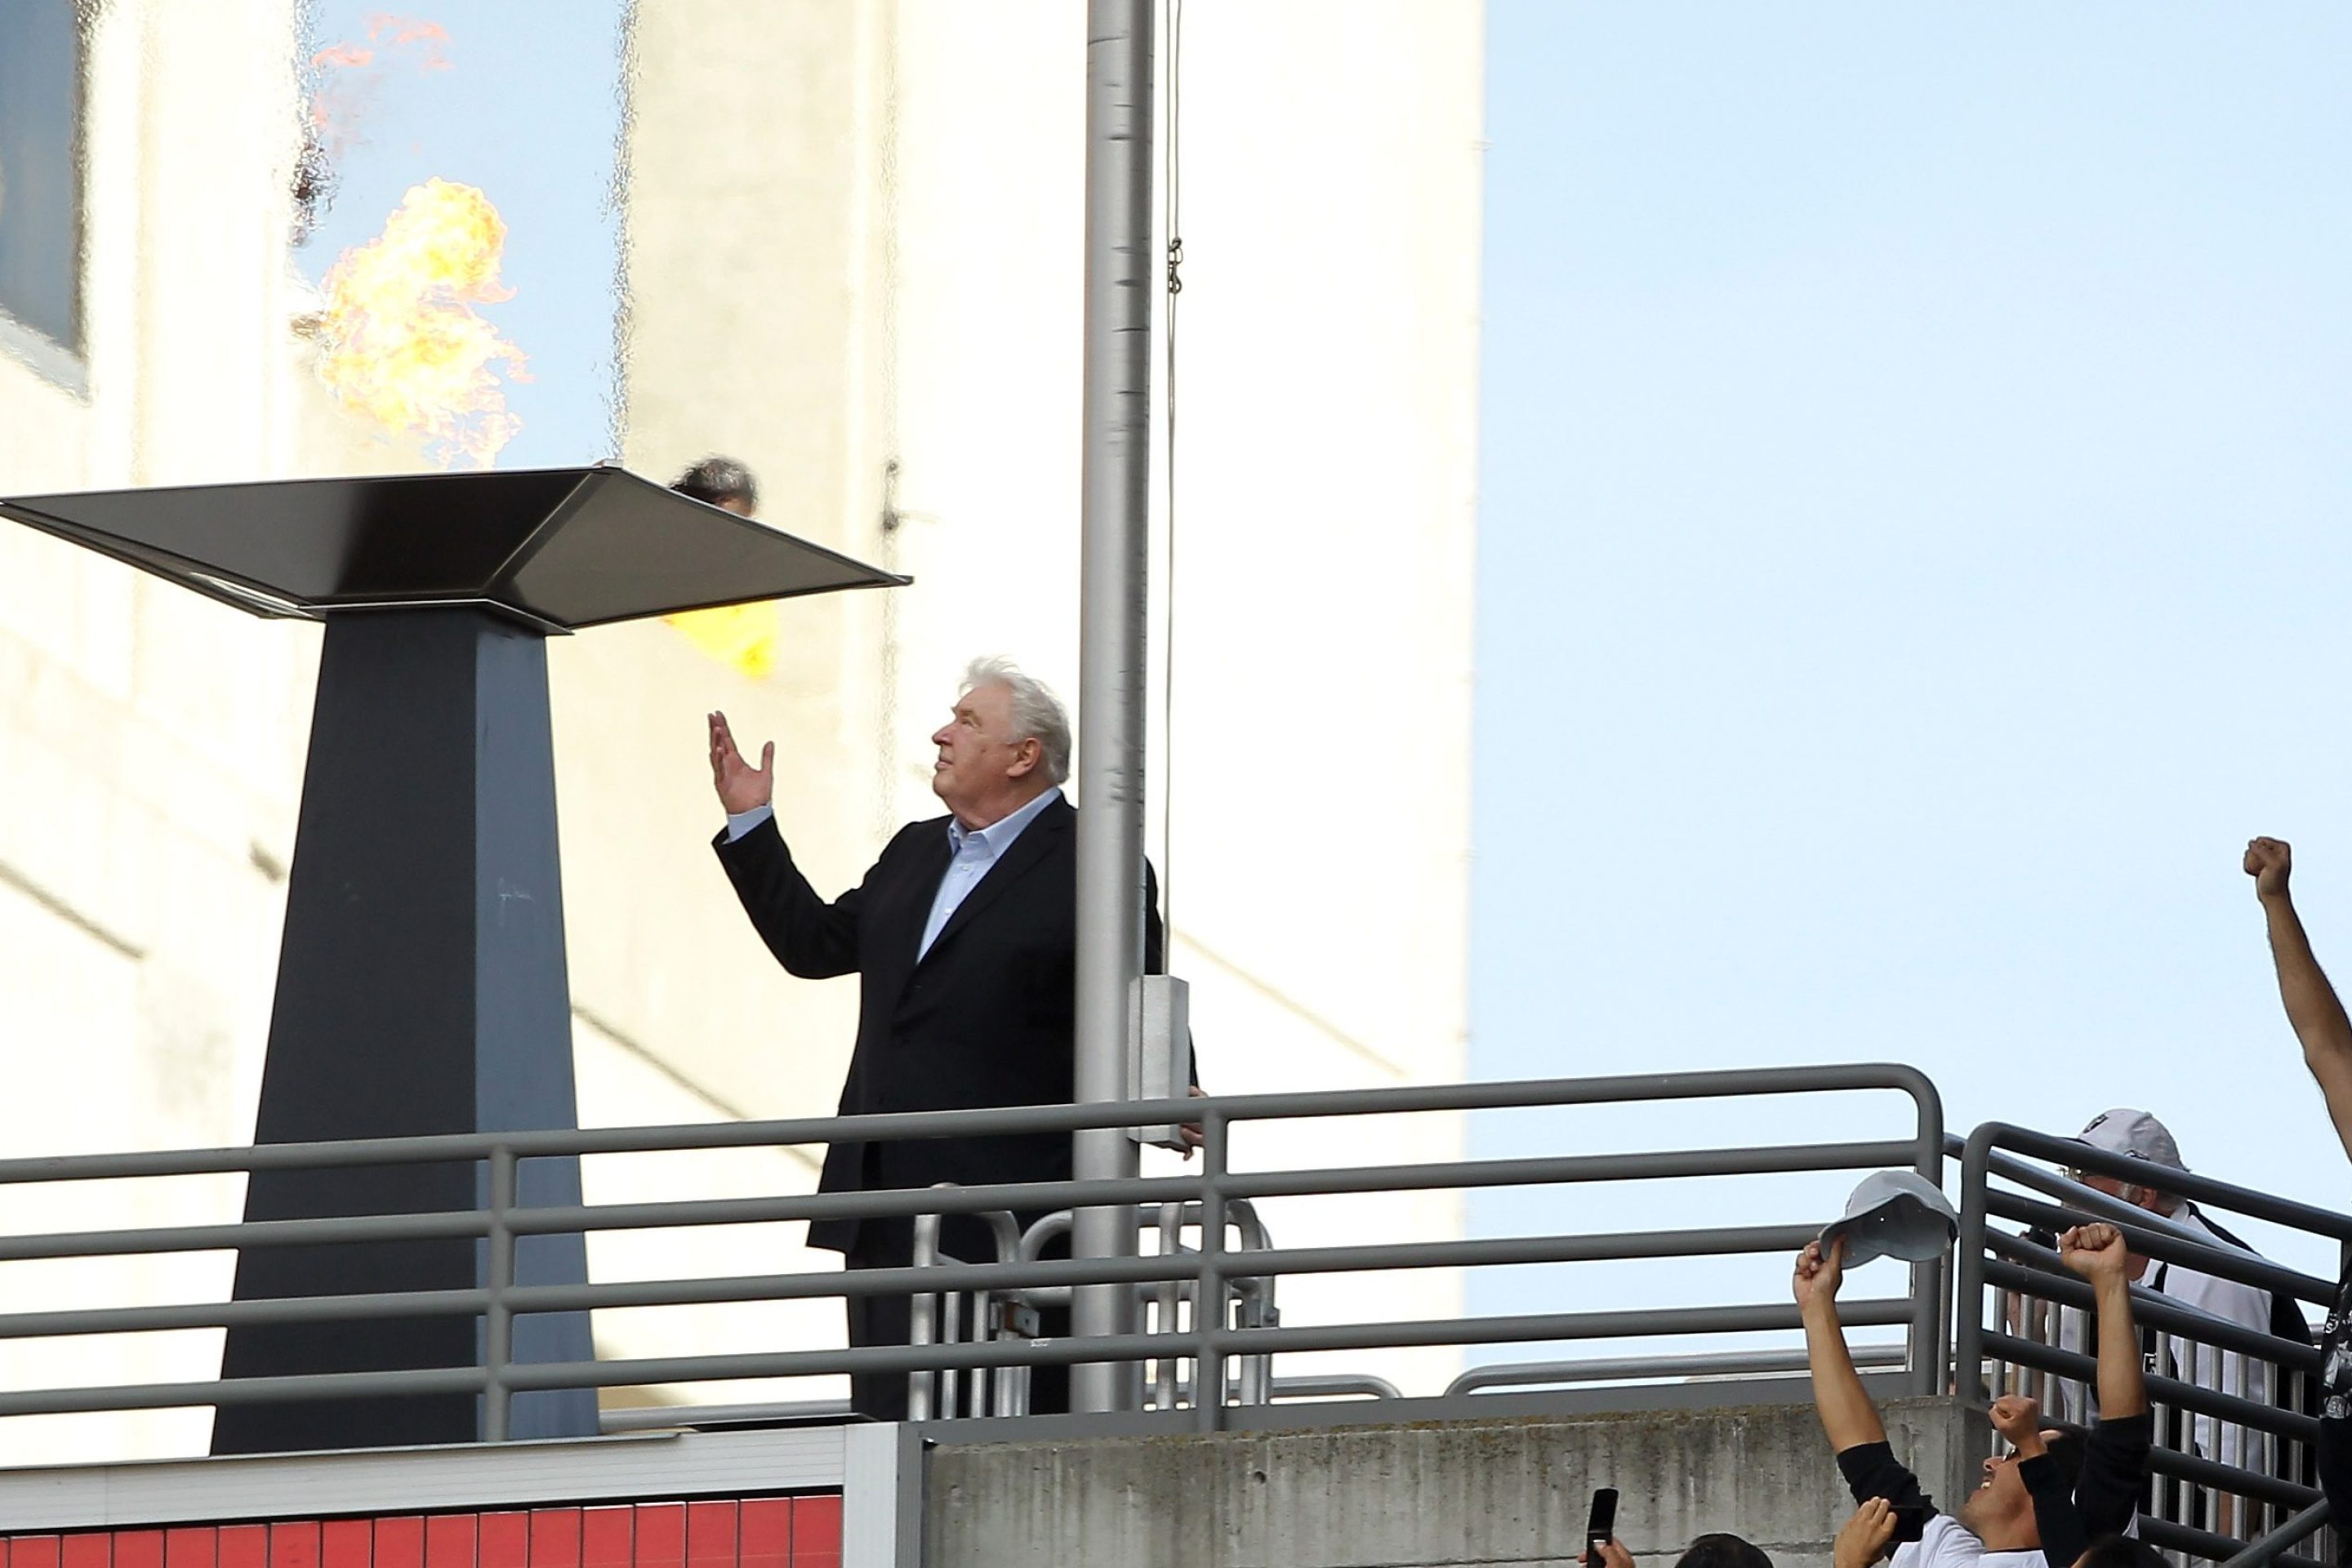 John Madden points to the sky after lighting a flame in the honor of Oakland Raiders owner Al Davis during halftime of their game against the Cleveland Browns at O.co Coliseum on October 16, 2011 in Oakland, California.